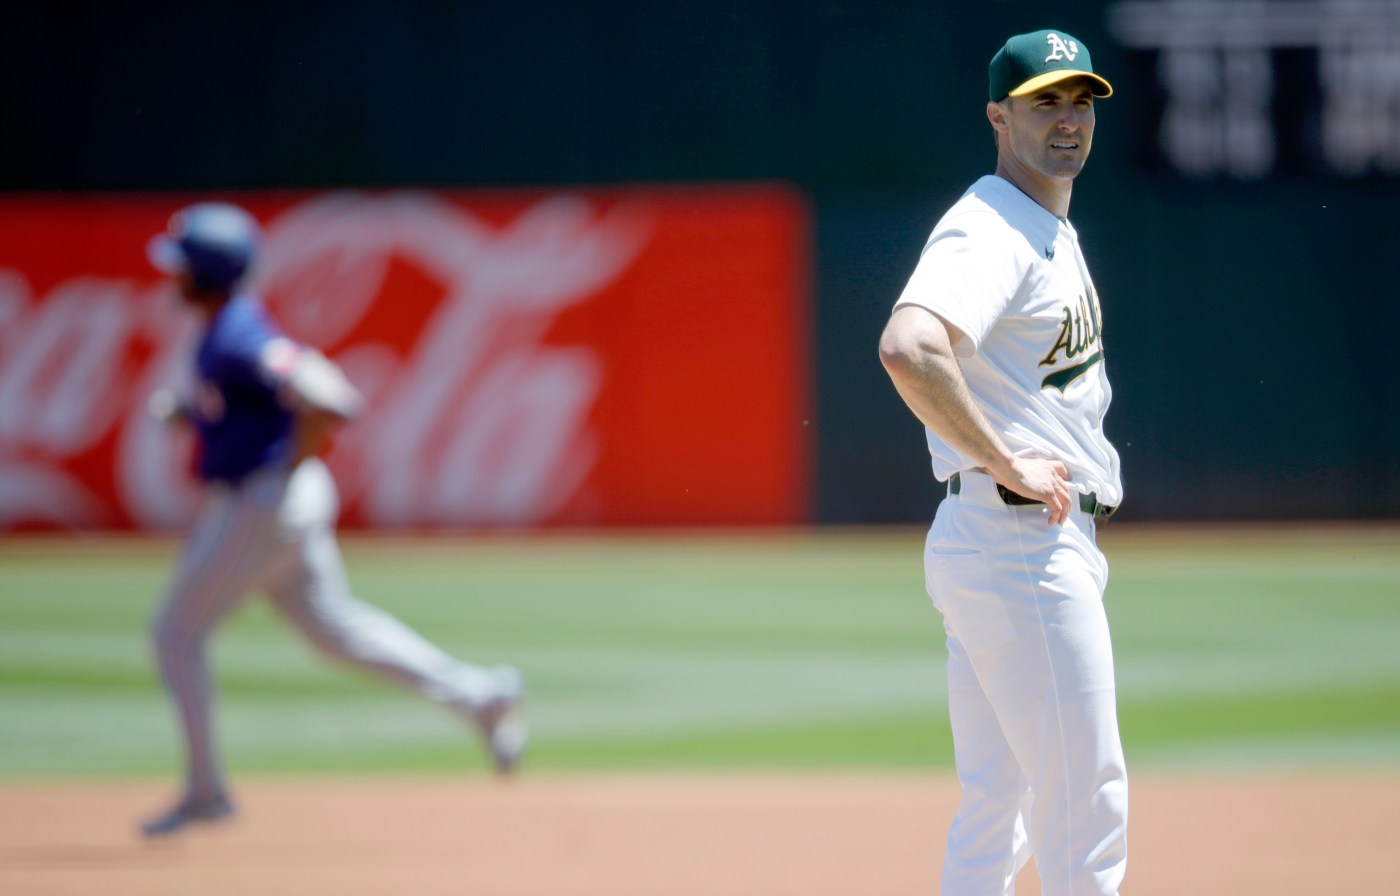 athletics-knocked-out-early-by-rangers-a-day-after-absorbing-late-inning-gut-punch